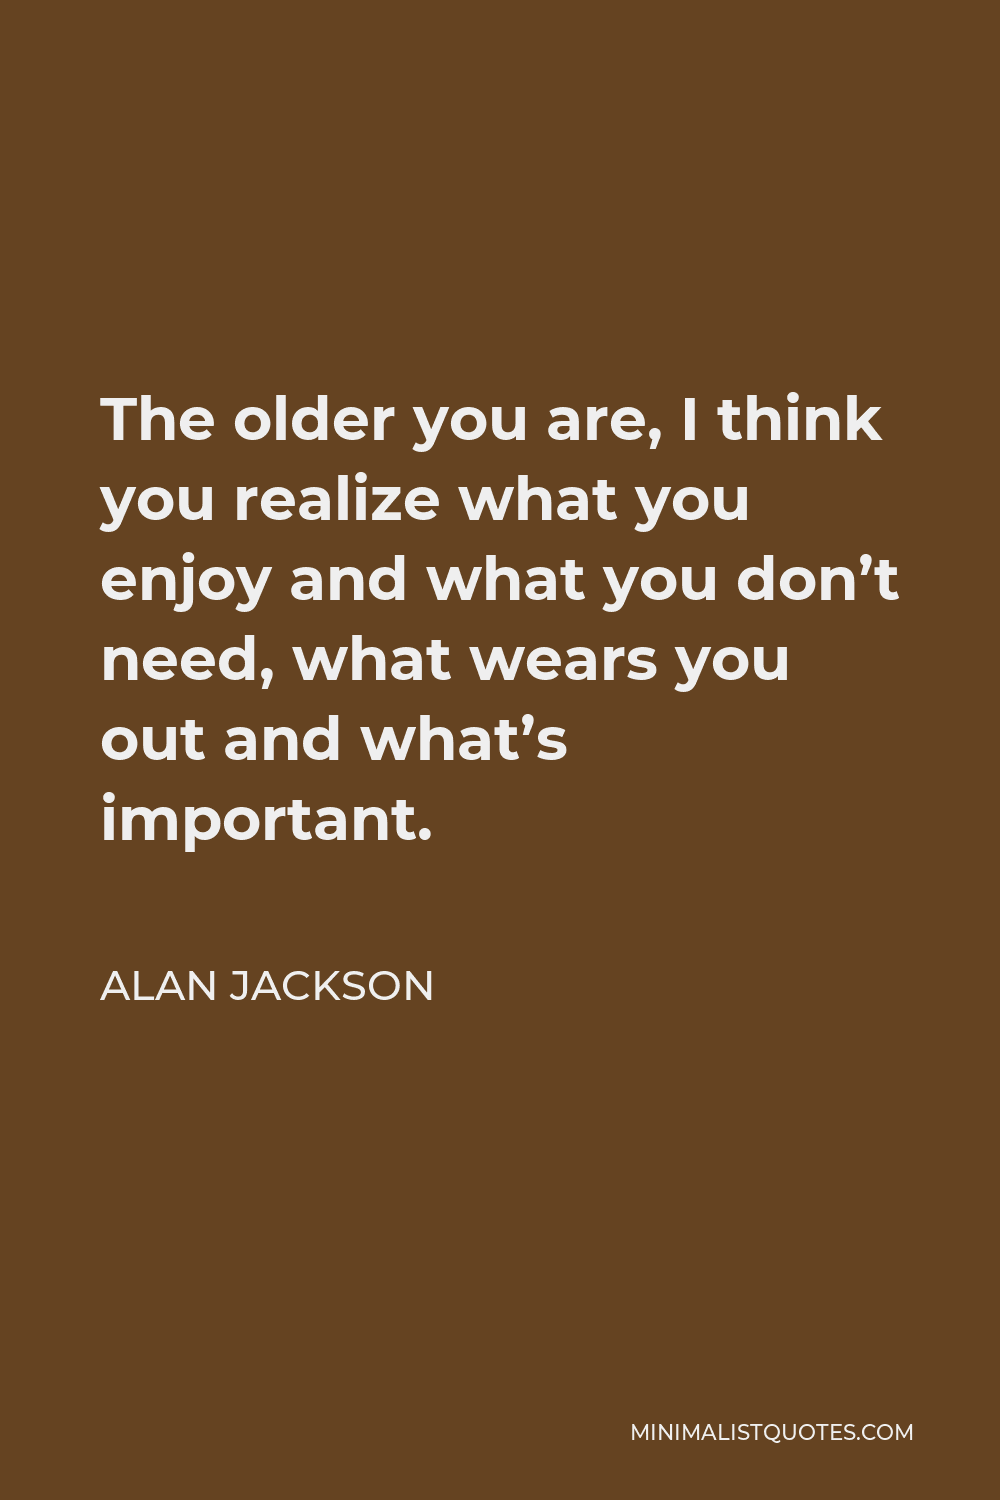 Alan Jackson Quote - The older you are, I think you realize what you enjoy and what you don’t need, what wears you out and what’s important.